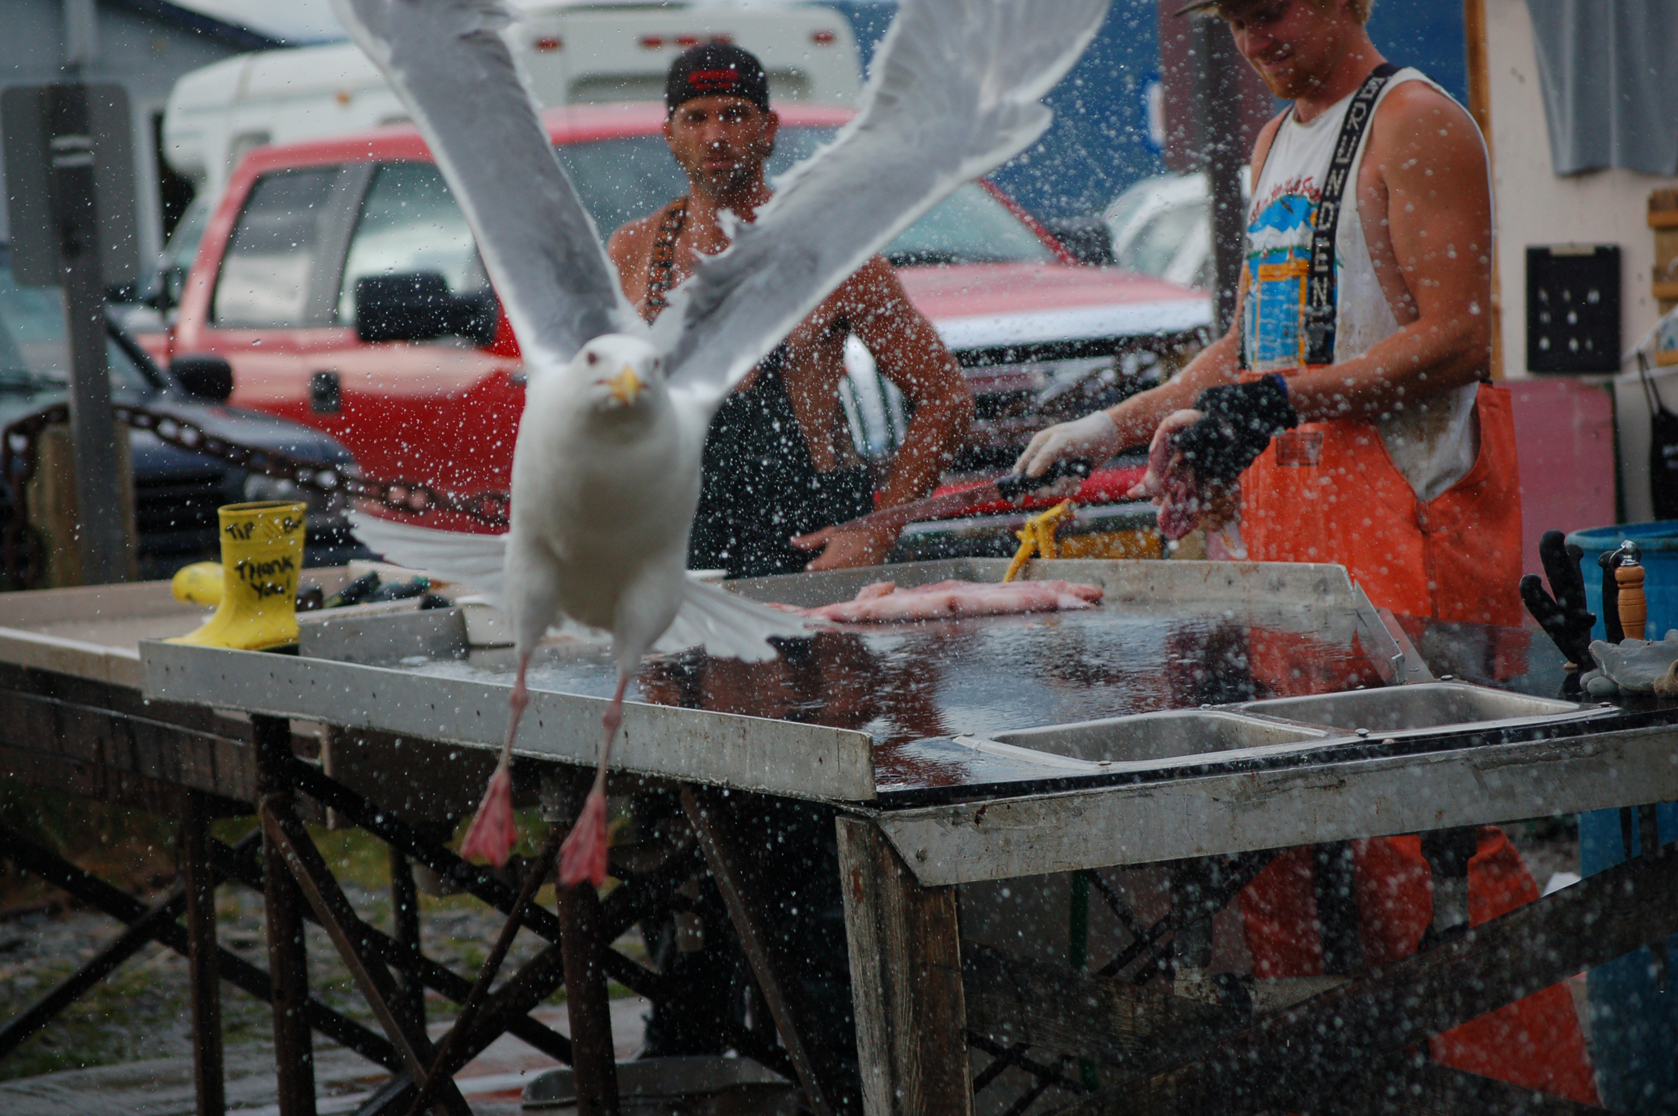 A gull intrudes at the Buttwhacker cleaning table.-Photo by Michael Armstrong, Homer News